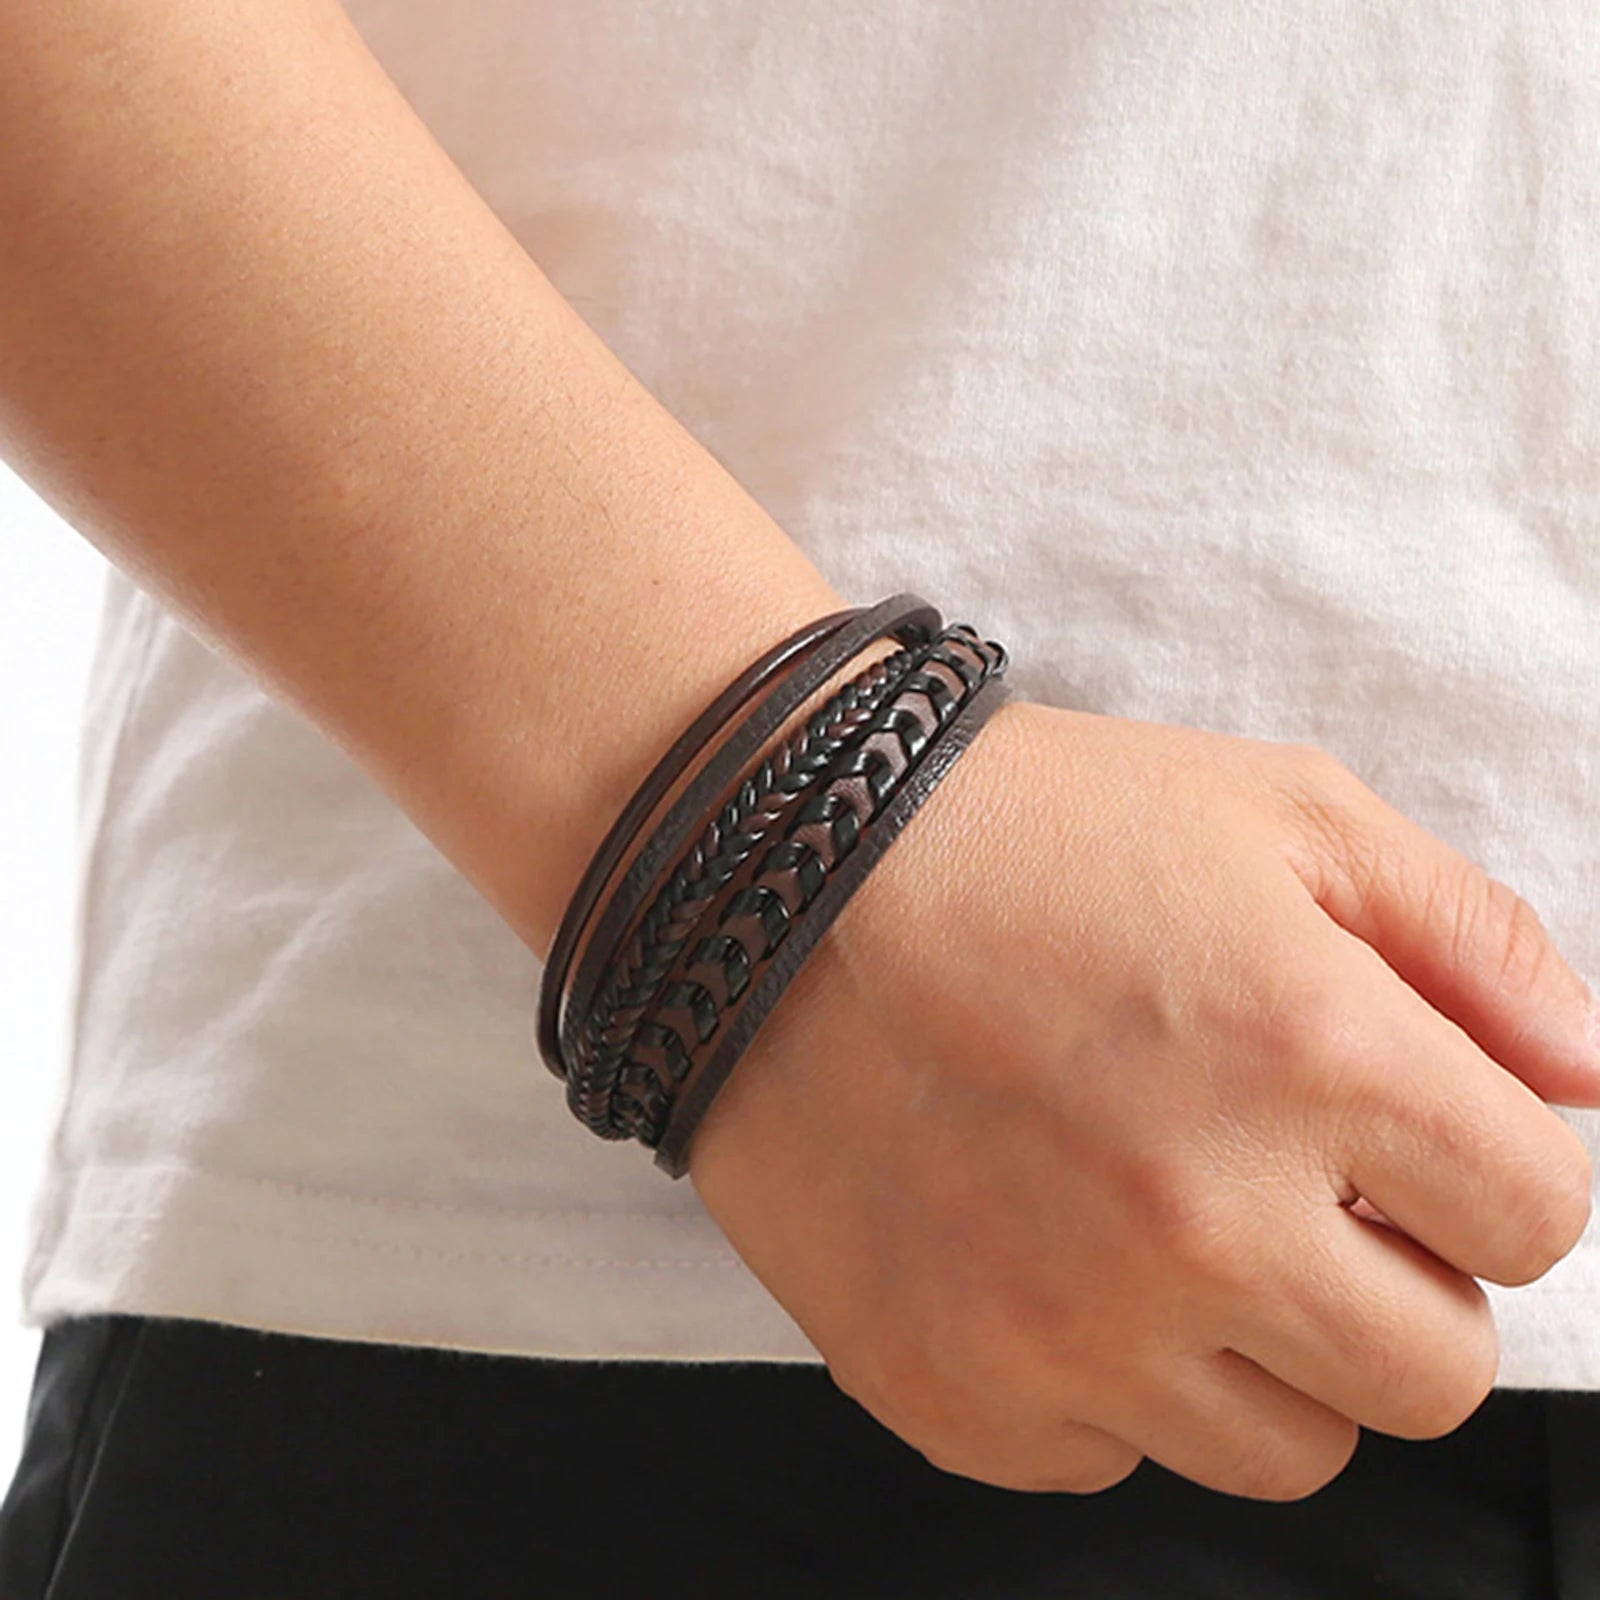 Leather Bracelets - Trend-Setting Gifts for Style and Wellness - Free Shipping Available!